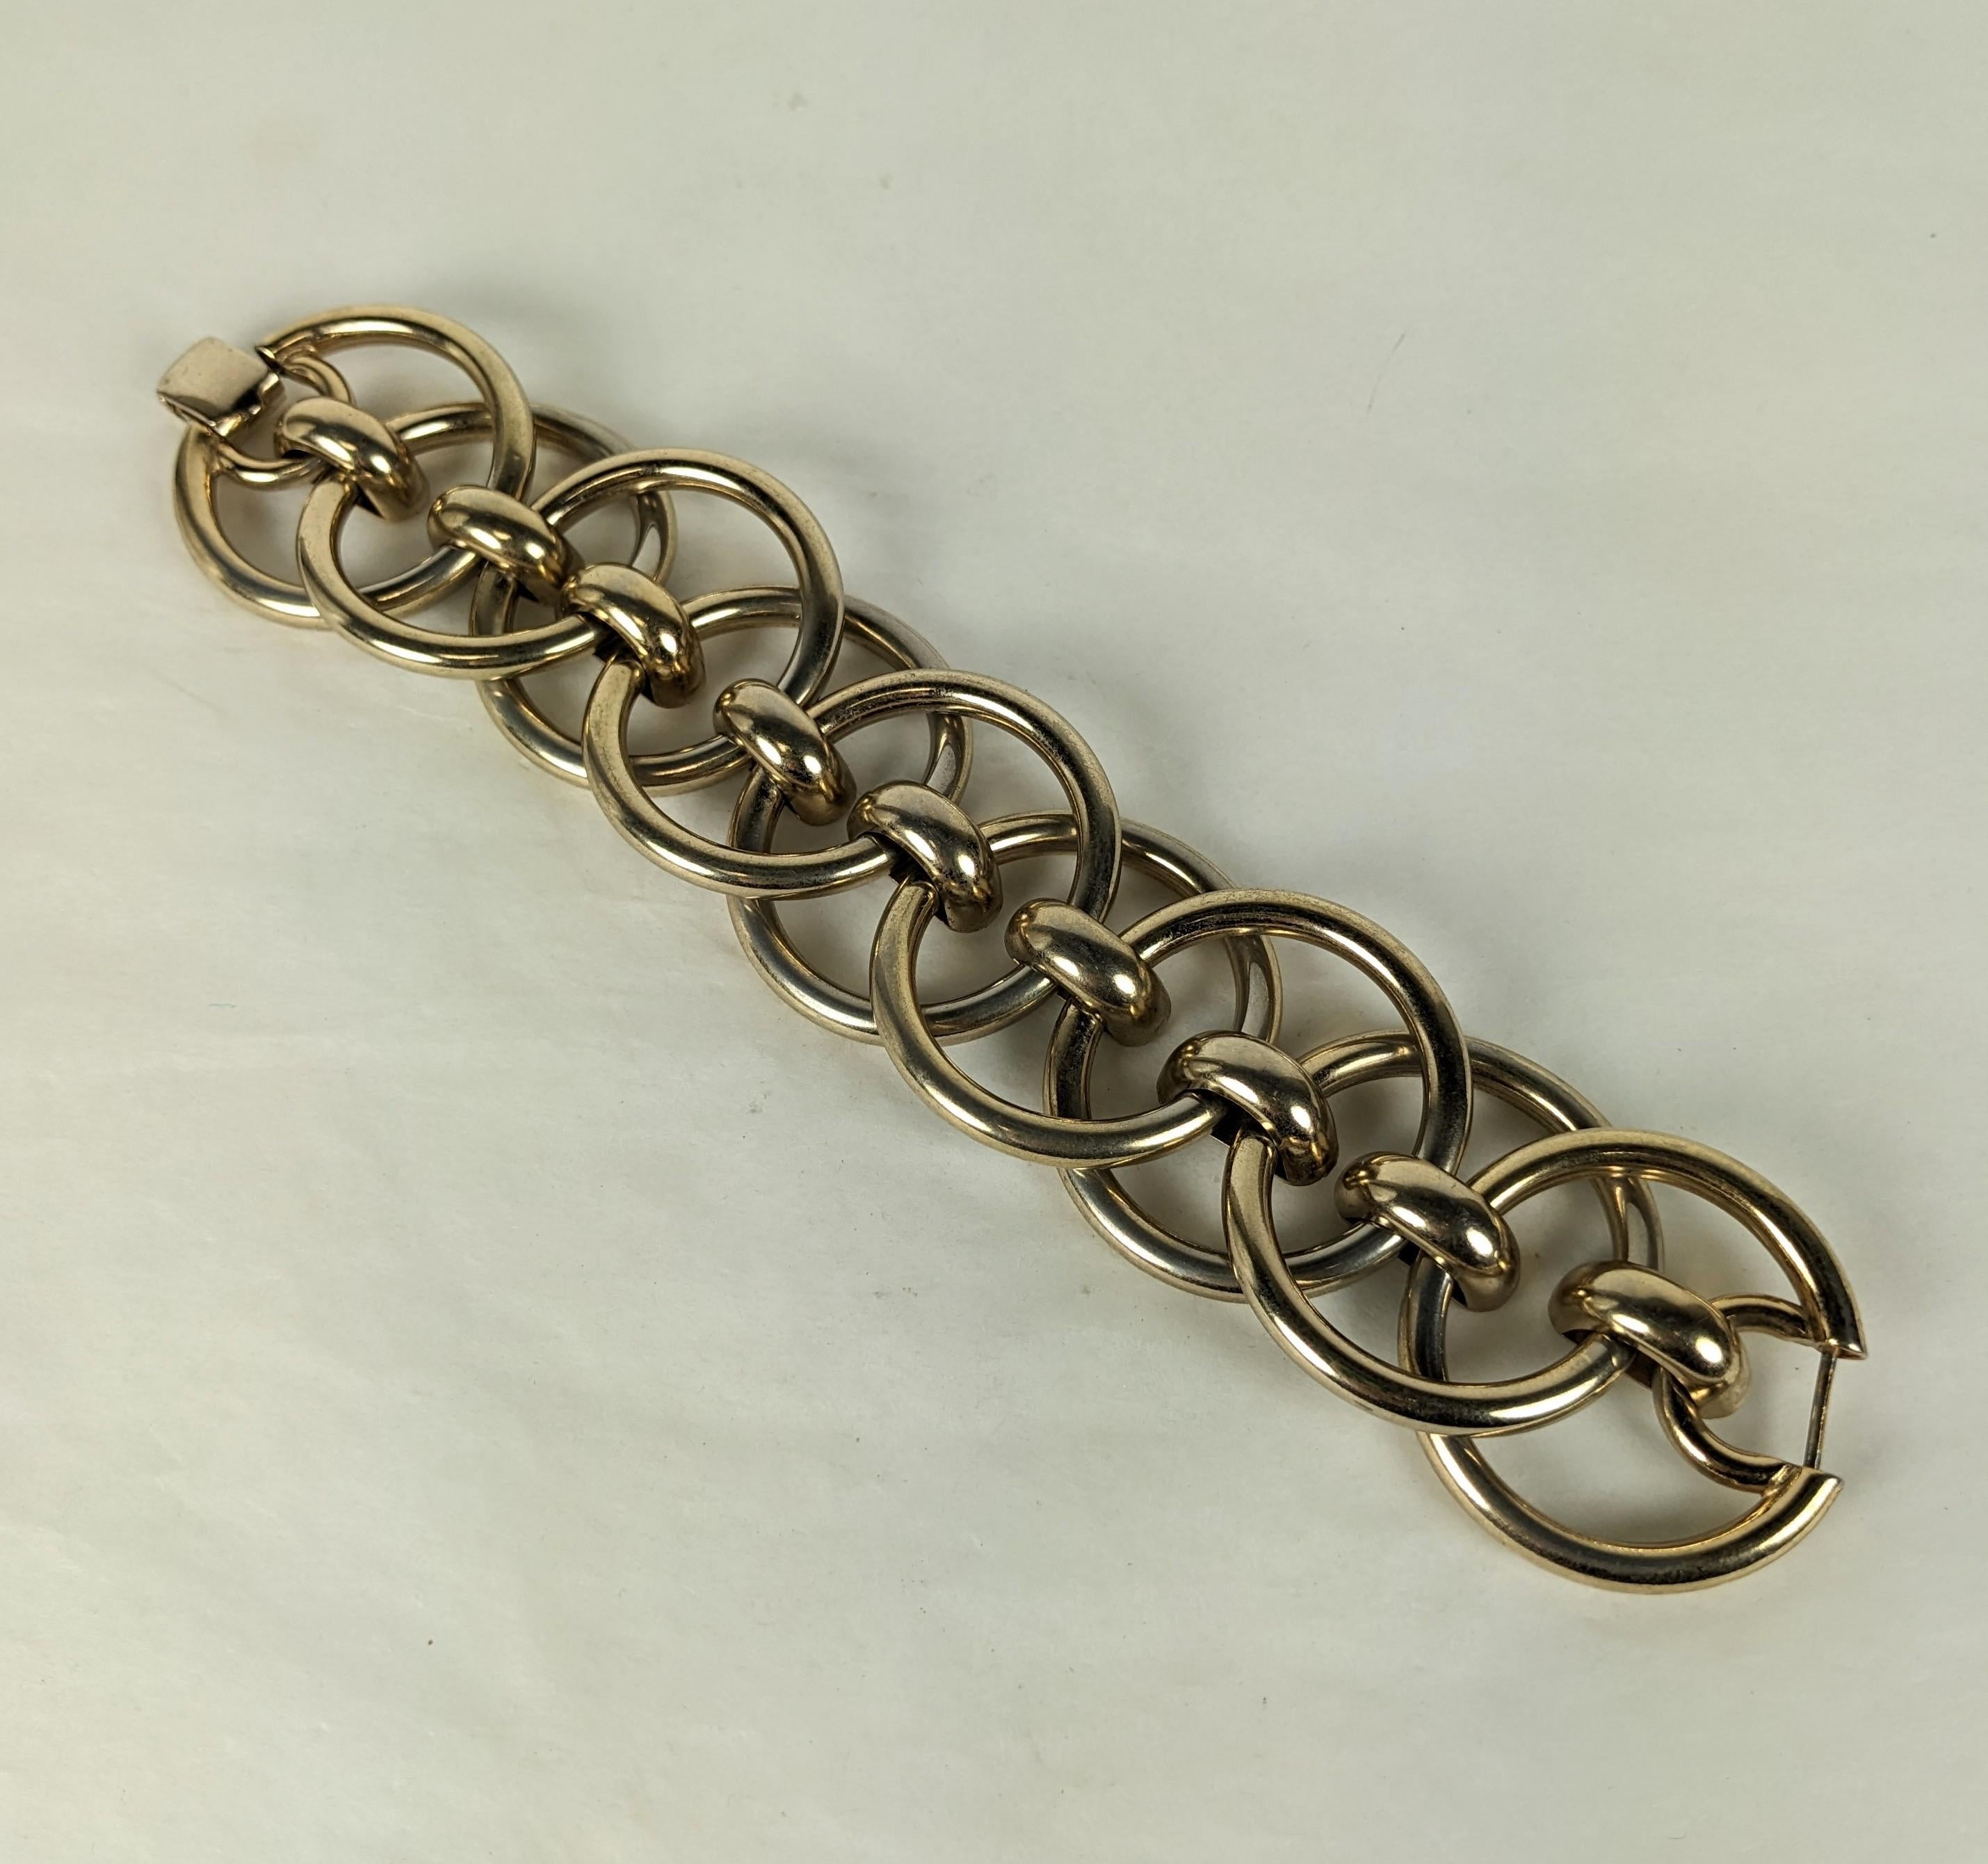 Massive Retro Monet Circle Link Bracelet from the 1940's. Wide hollow circle links alternate to form this striking link design. 
1940's USA. Signed Monet. 
9